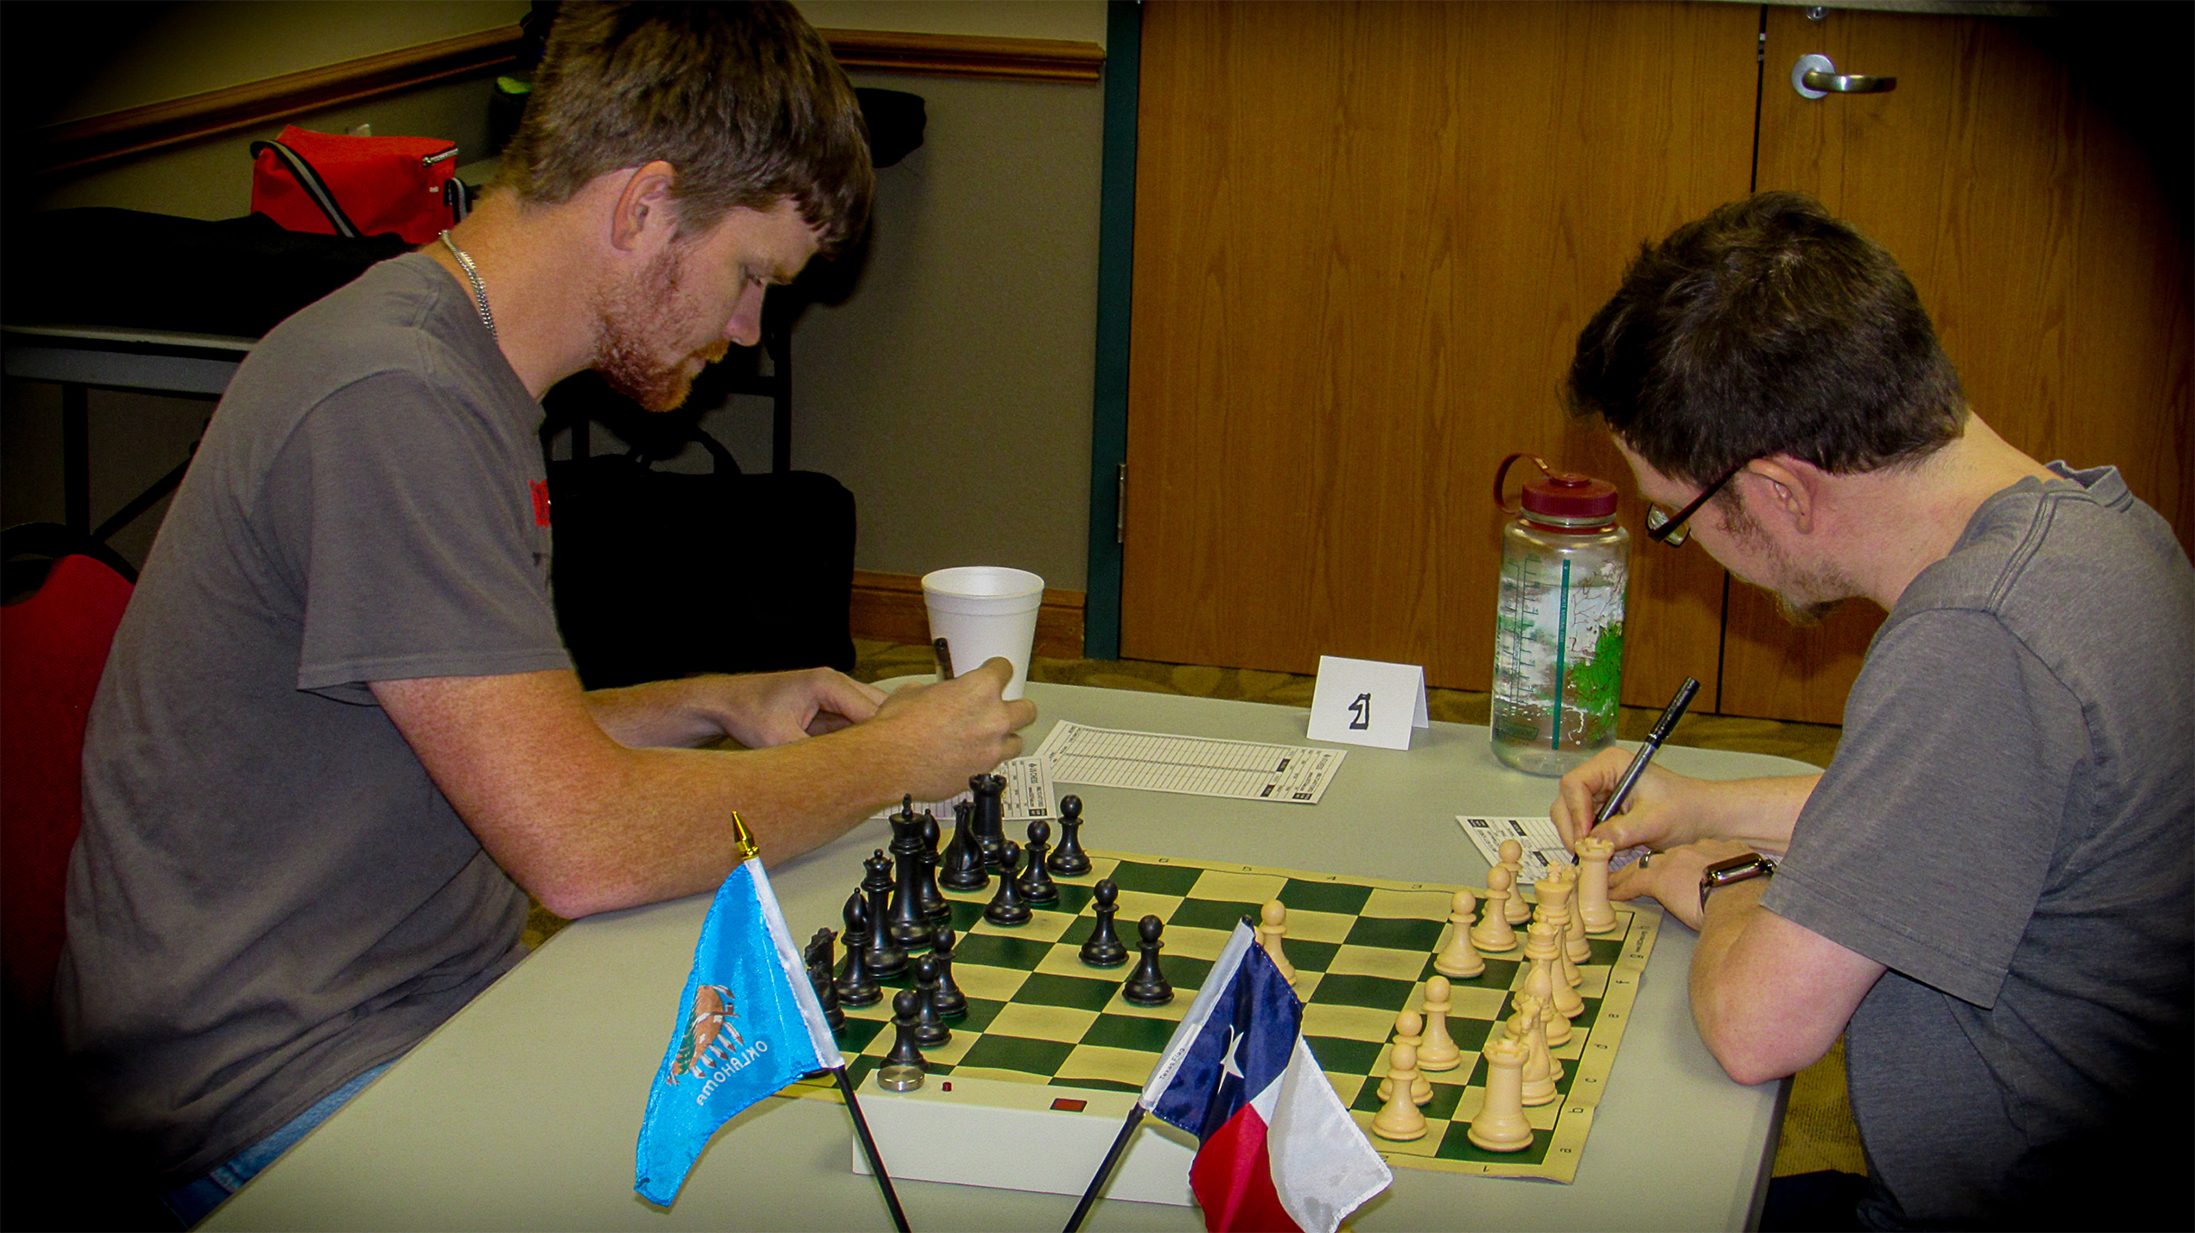 On Board One, Chess Expert Logan Zachare (left) valiantly battled, in what had to be the toughest match of his career, against US Chess Original Life Chess Master Austen Green (right).  LM Green prevailed with a 2-0 sweep to help keep Texas close.  Photo by Mike Tubbs.